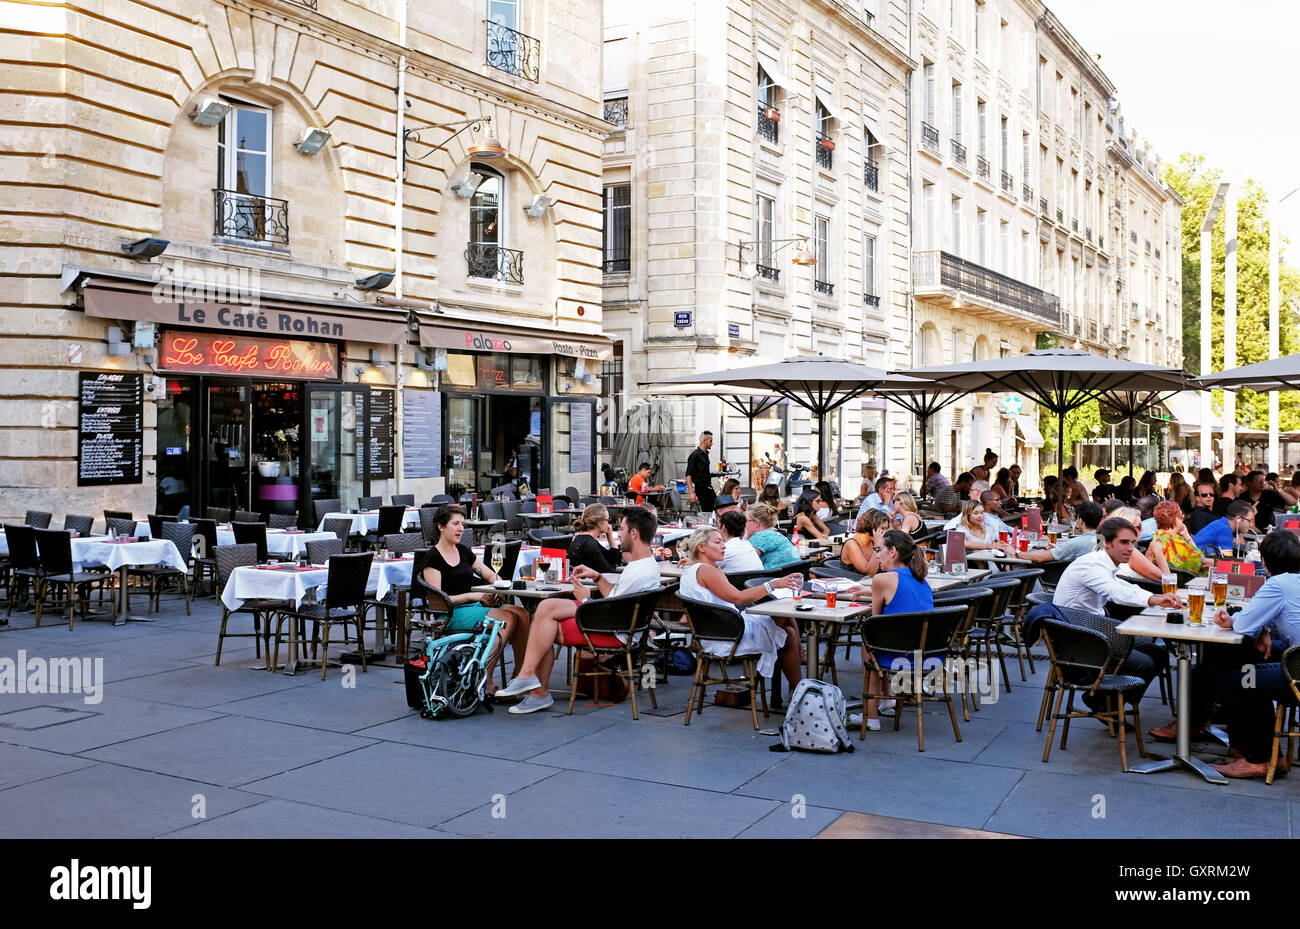 Le Cafe Rohan in Bordeaux a port city on the Garonne River in the Gironde department in south west France Stock Photo